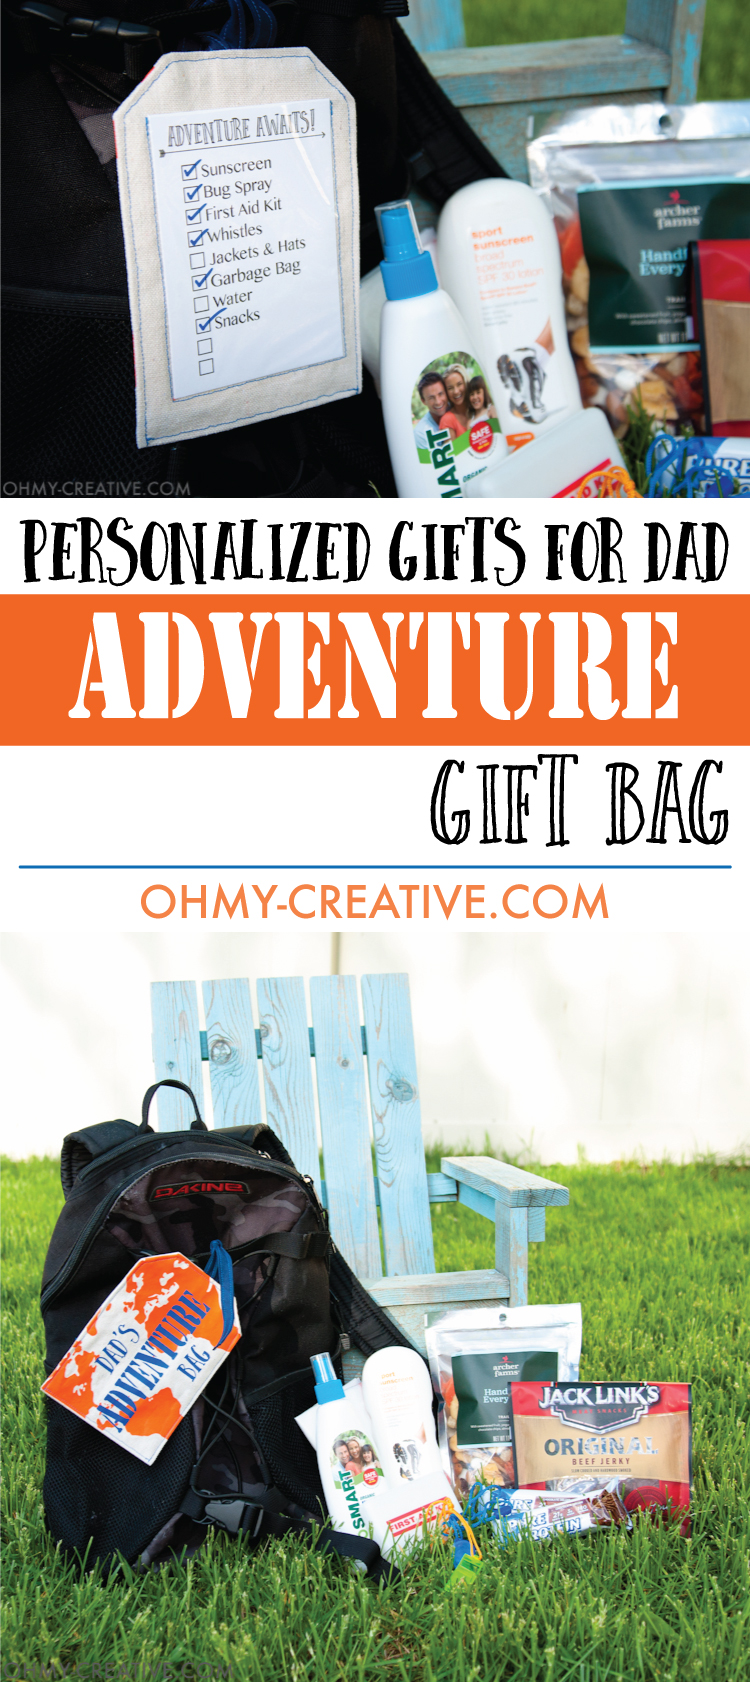 Create the best Personalized Gift for Dad. This Outdoor Adventure Gift Bag has everything you need to be ready for last minute summer adventures with dad. The perfect Father's Day gift idea. | OHMY-CREATIVE.COM